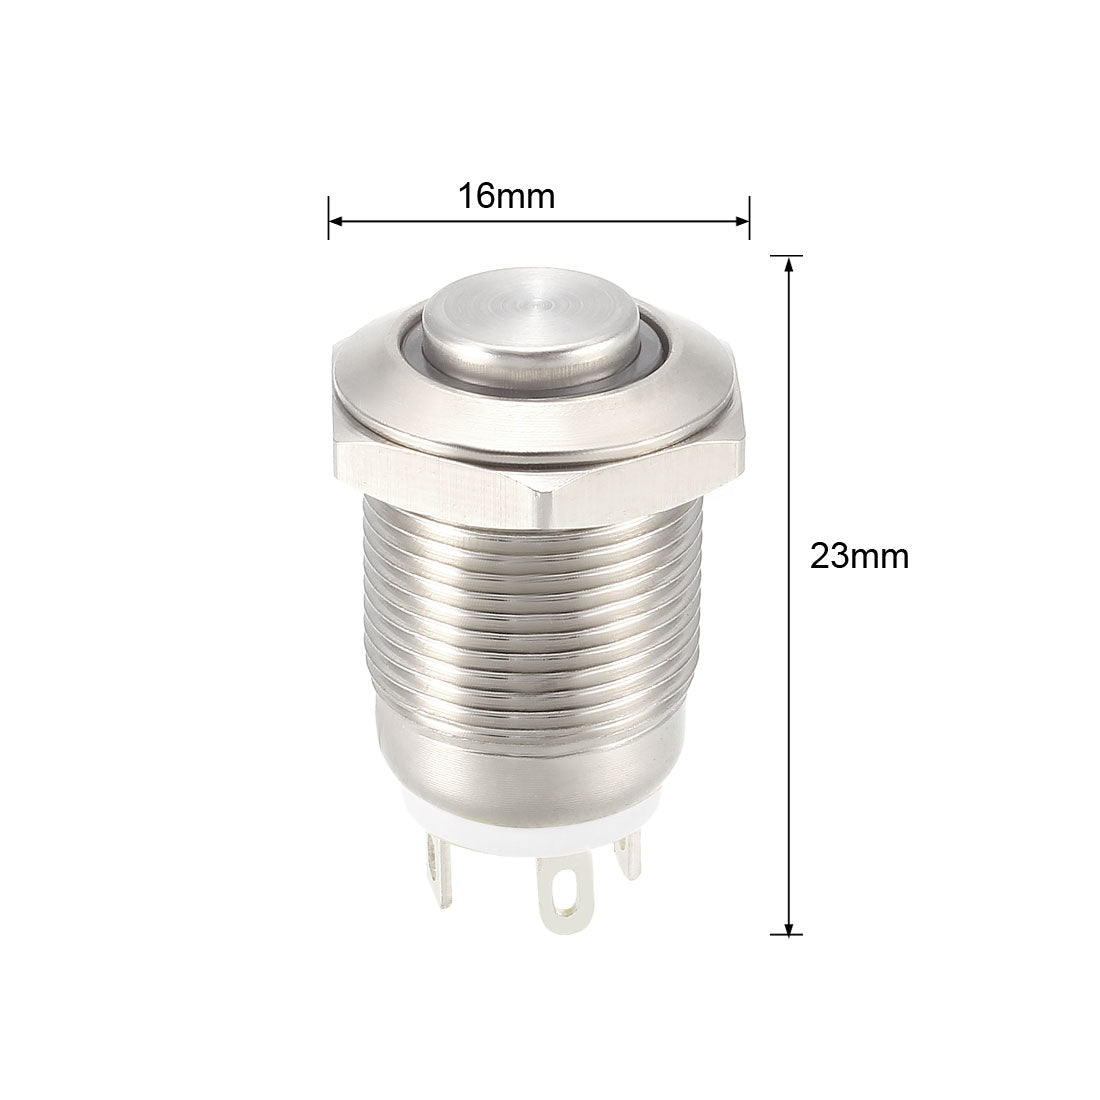 uxcell Uxcell Momentary Metal Push Button Switch High Head 12mm Mounting Dia 1NO 12V LED Light